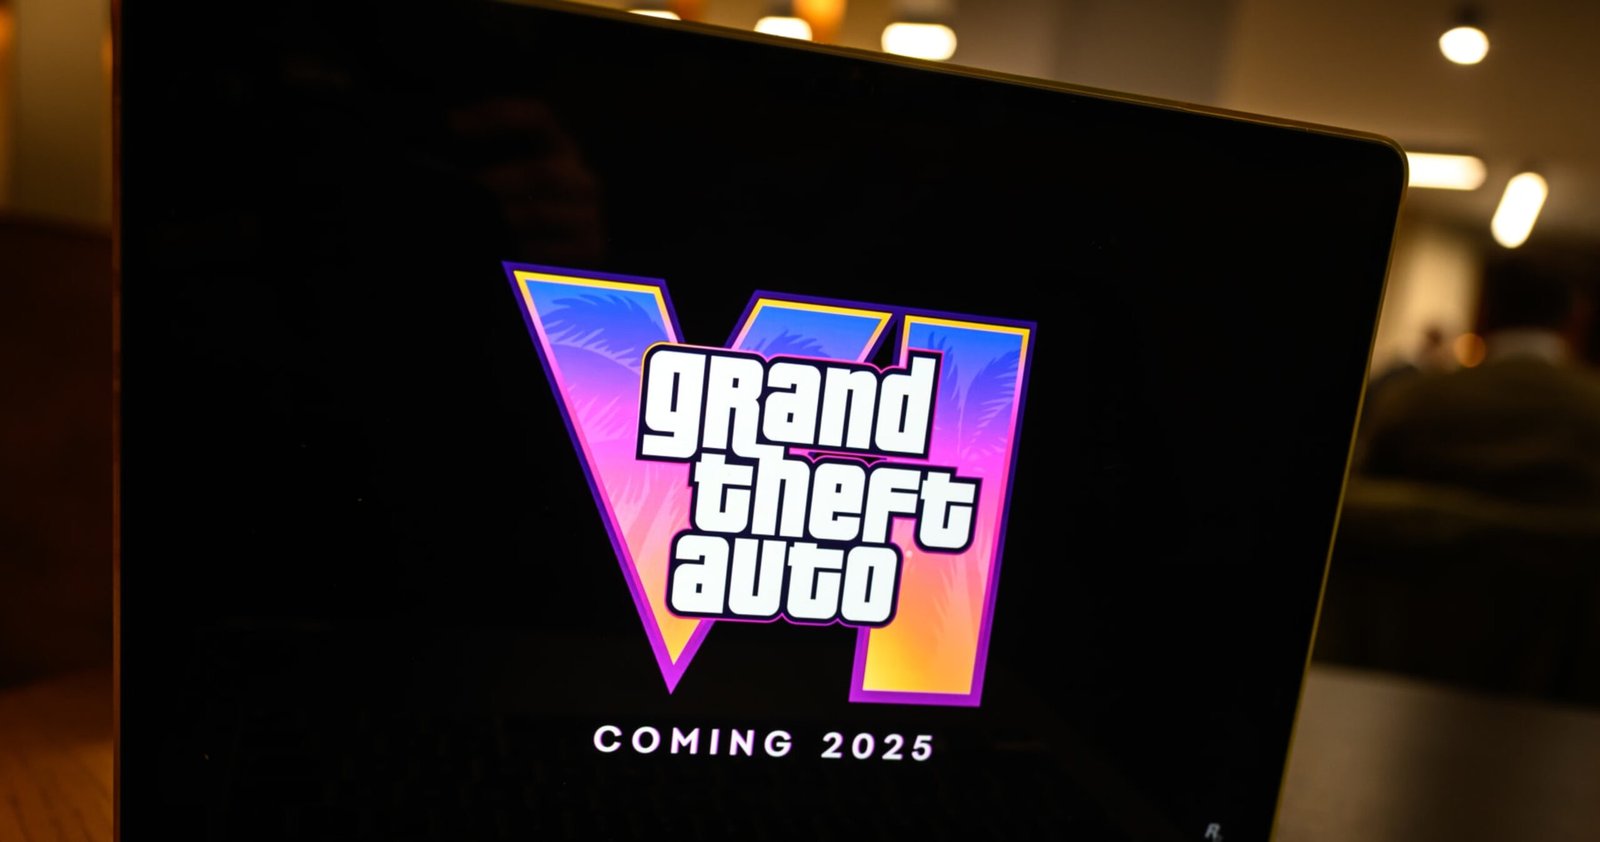 Grand Theft Auto VI Video Sport Scheduled for Fall 2025 Launch Date